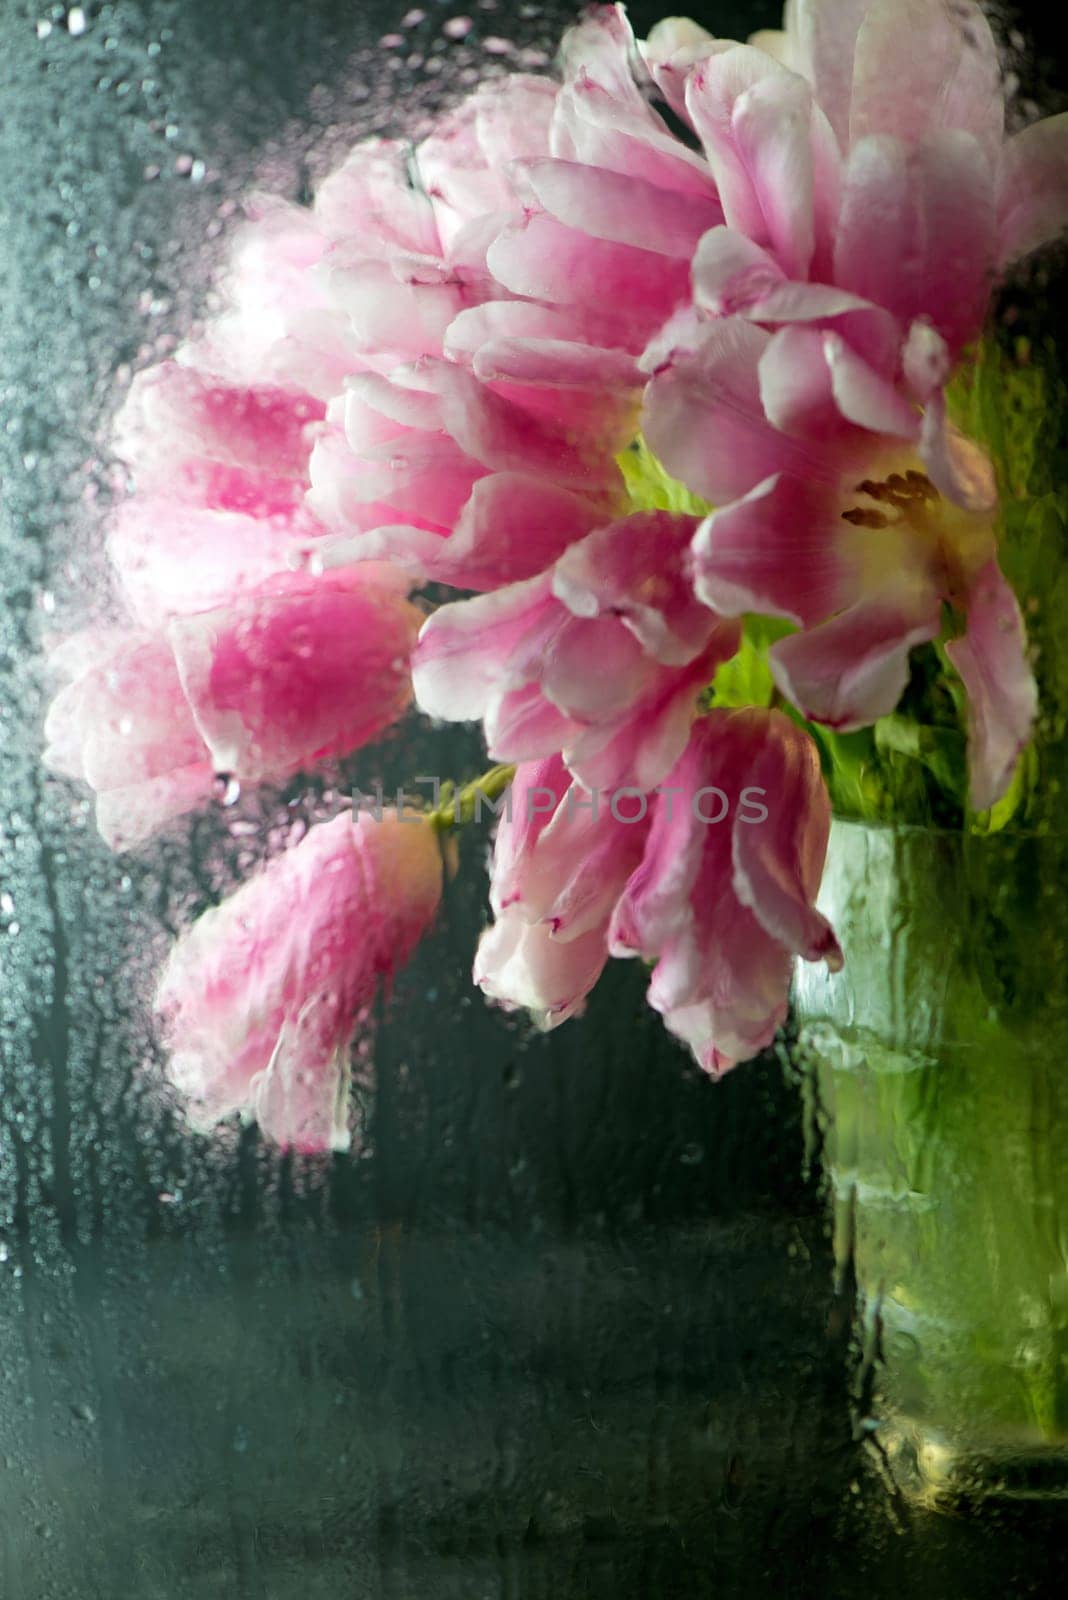 pink tulips in the house in the rain Rain outside